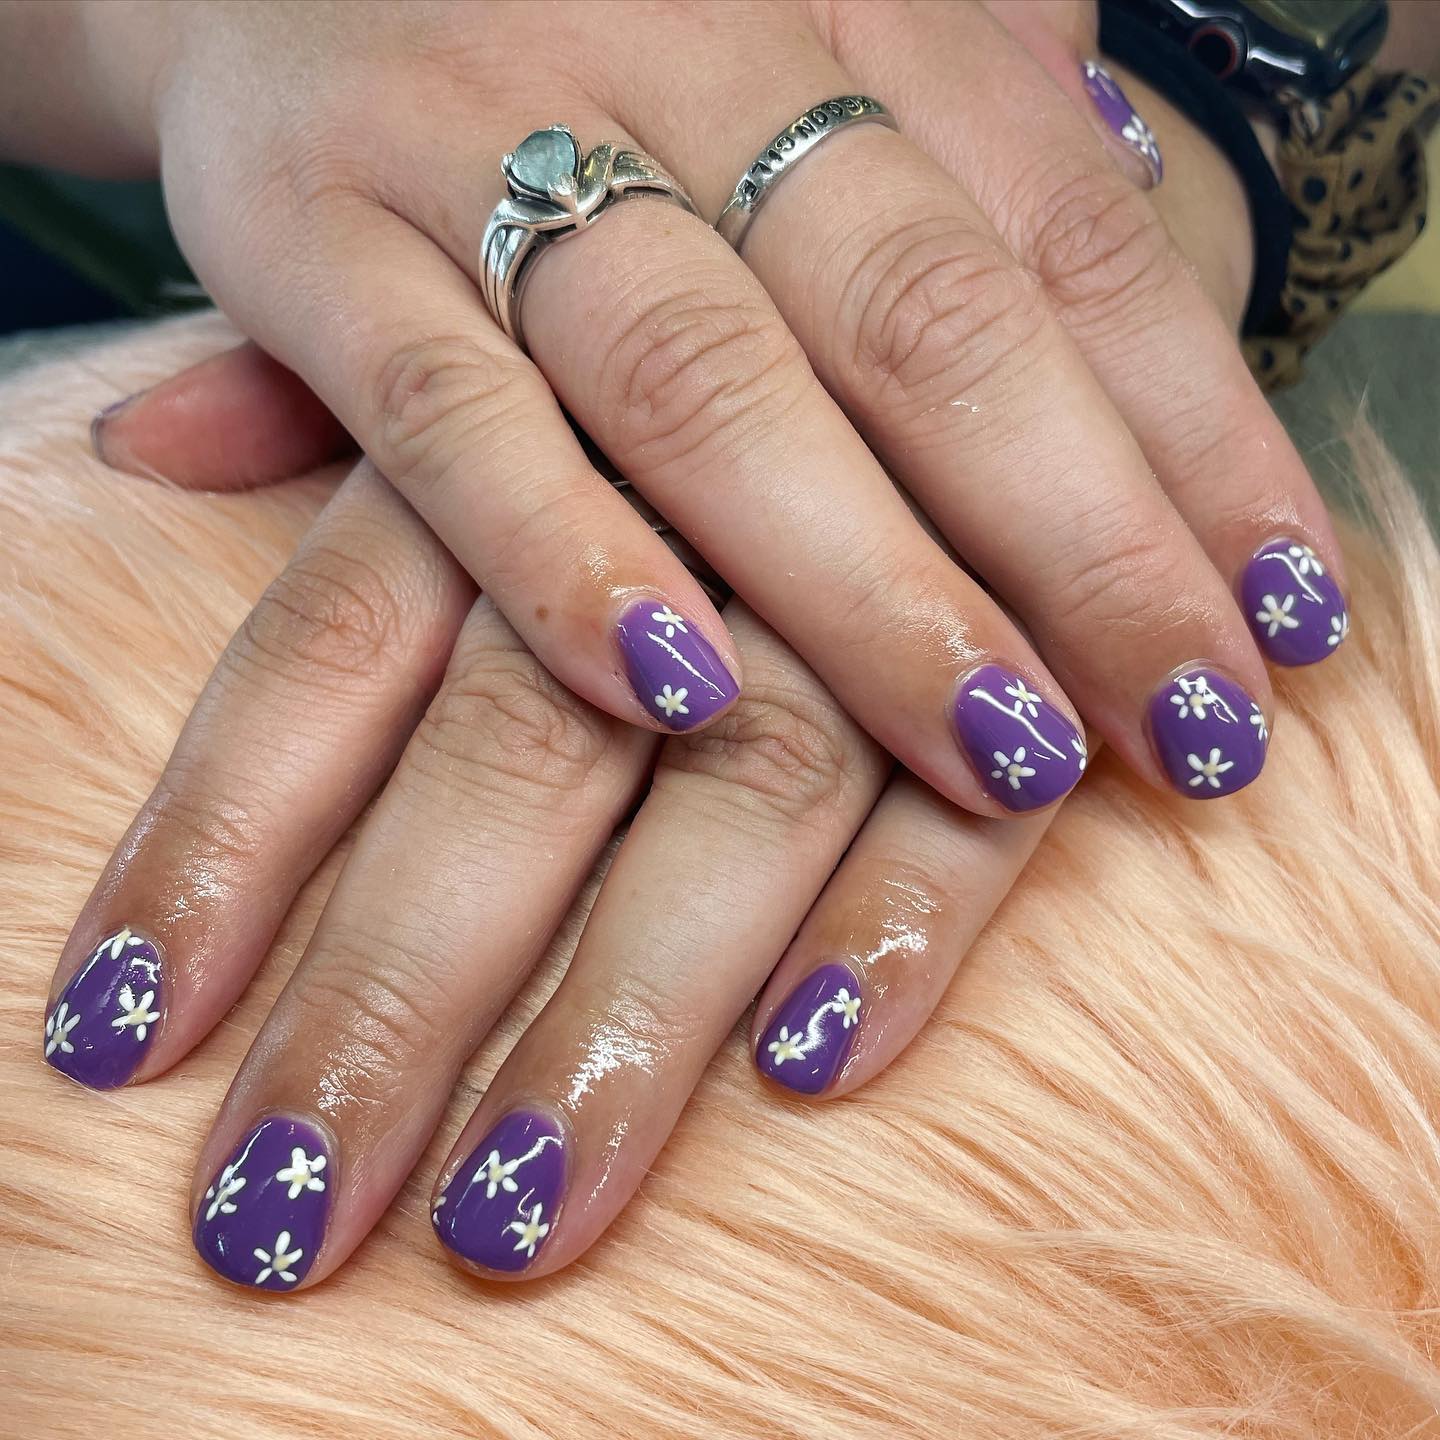 Here is a fun daisy mani that will make you happy every time you look at your nails! Then, what are you waiting for?